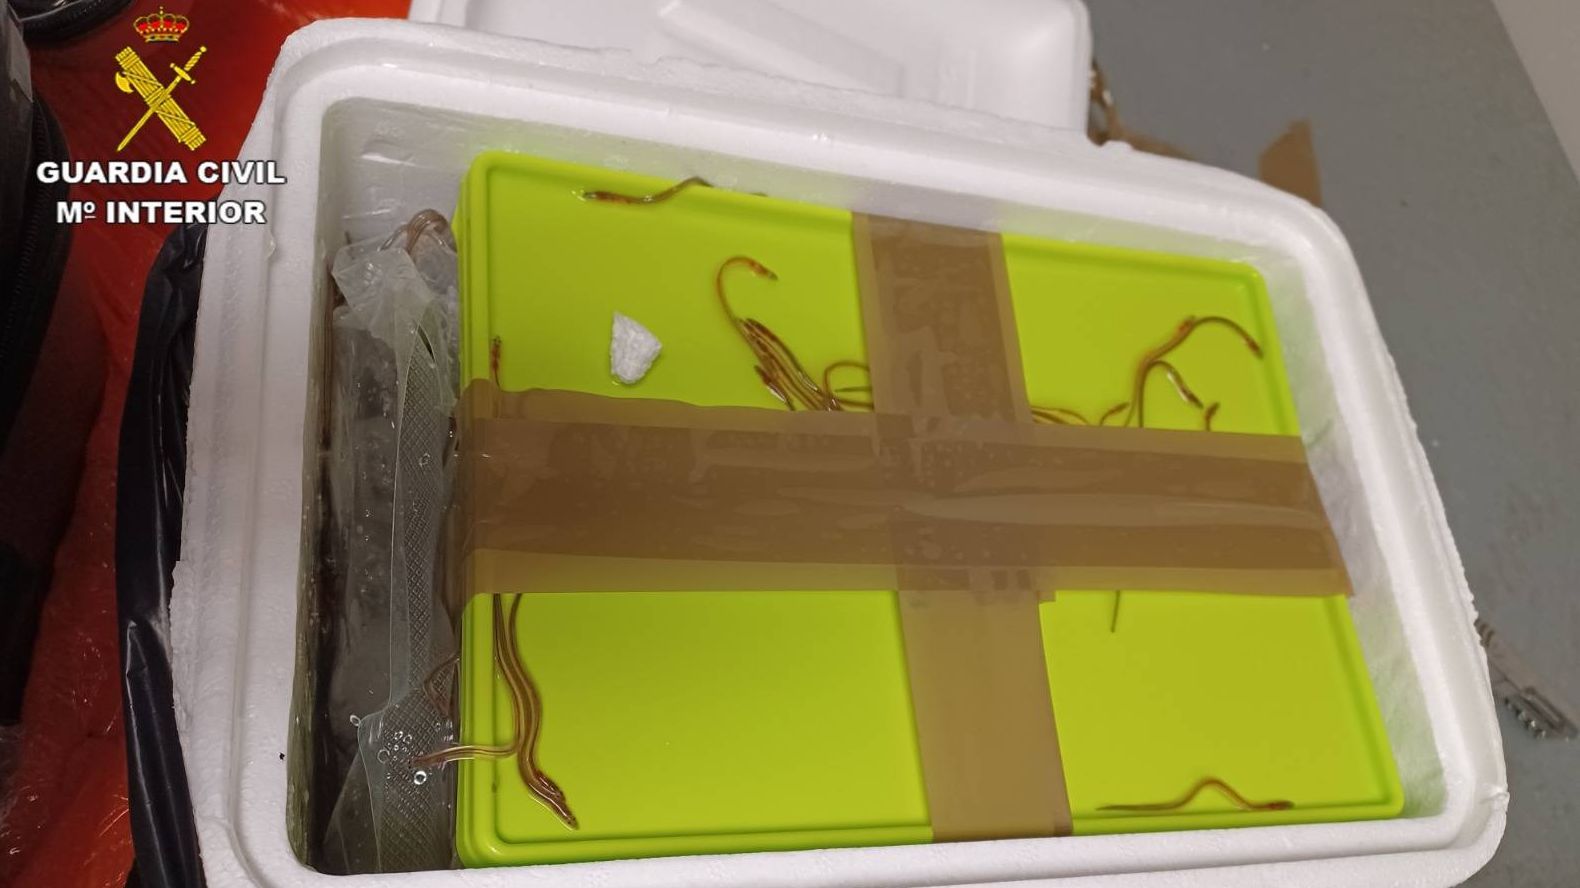 A passenger arrested for smuggling dwell eels on the Madrid airport